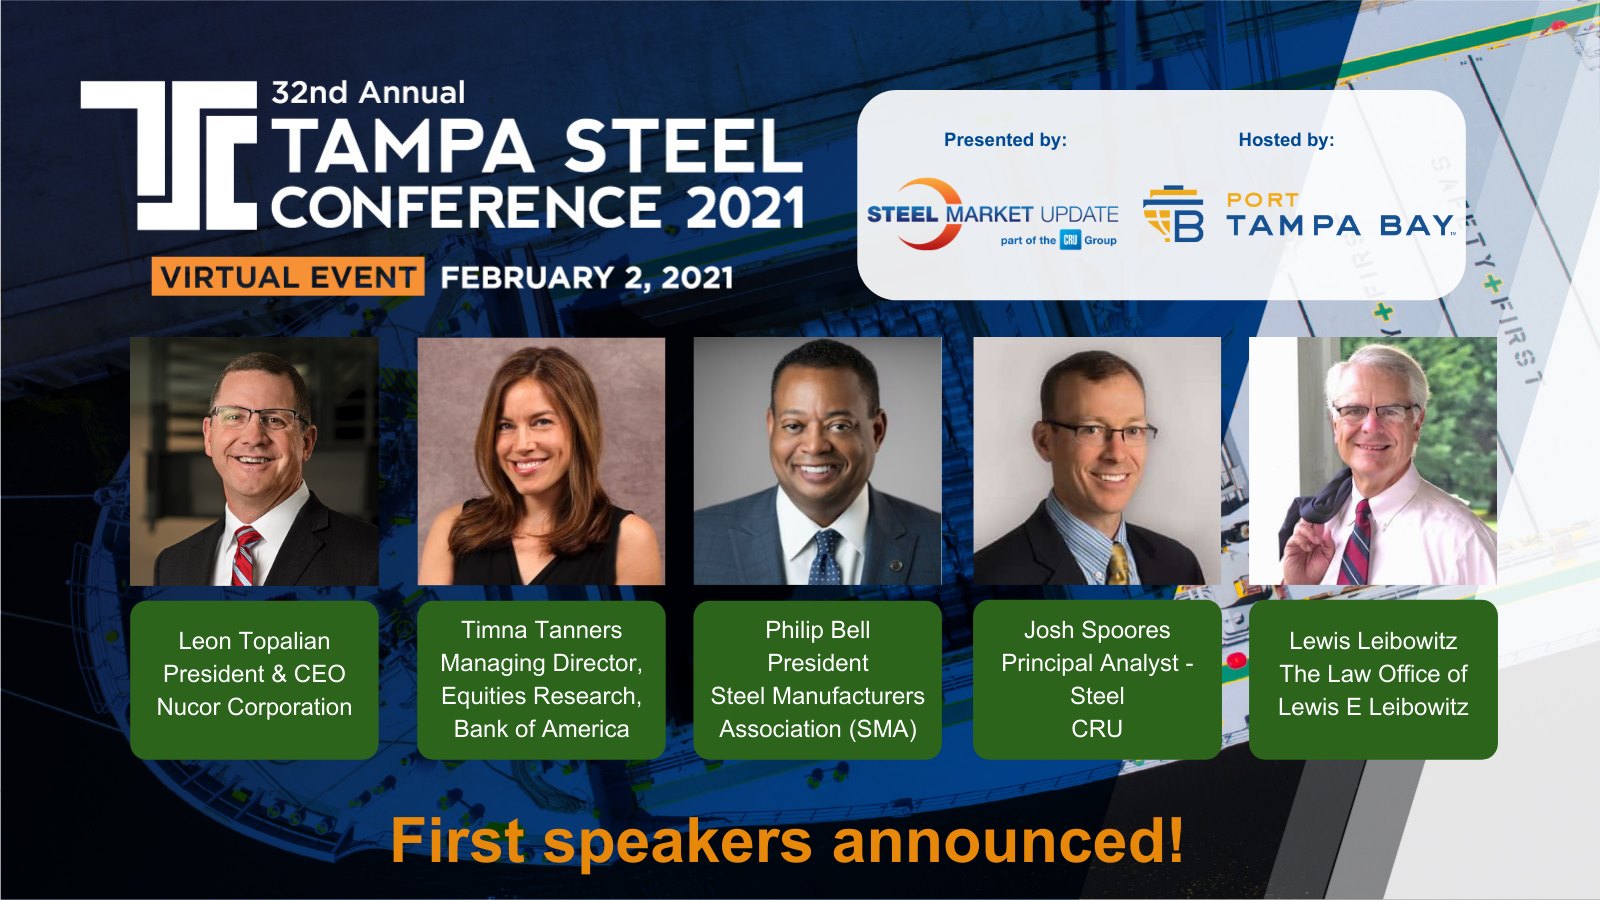 First speakers of 32nd Annual Tampa Steel Conference announced.